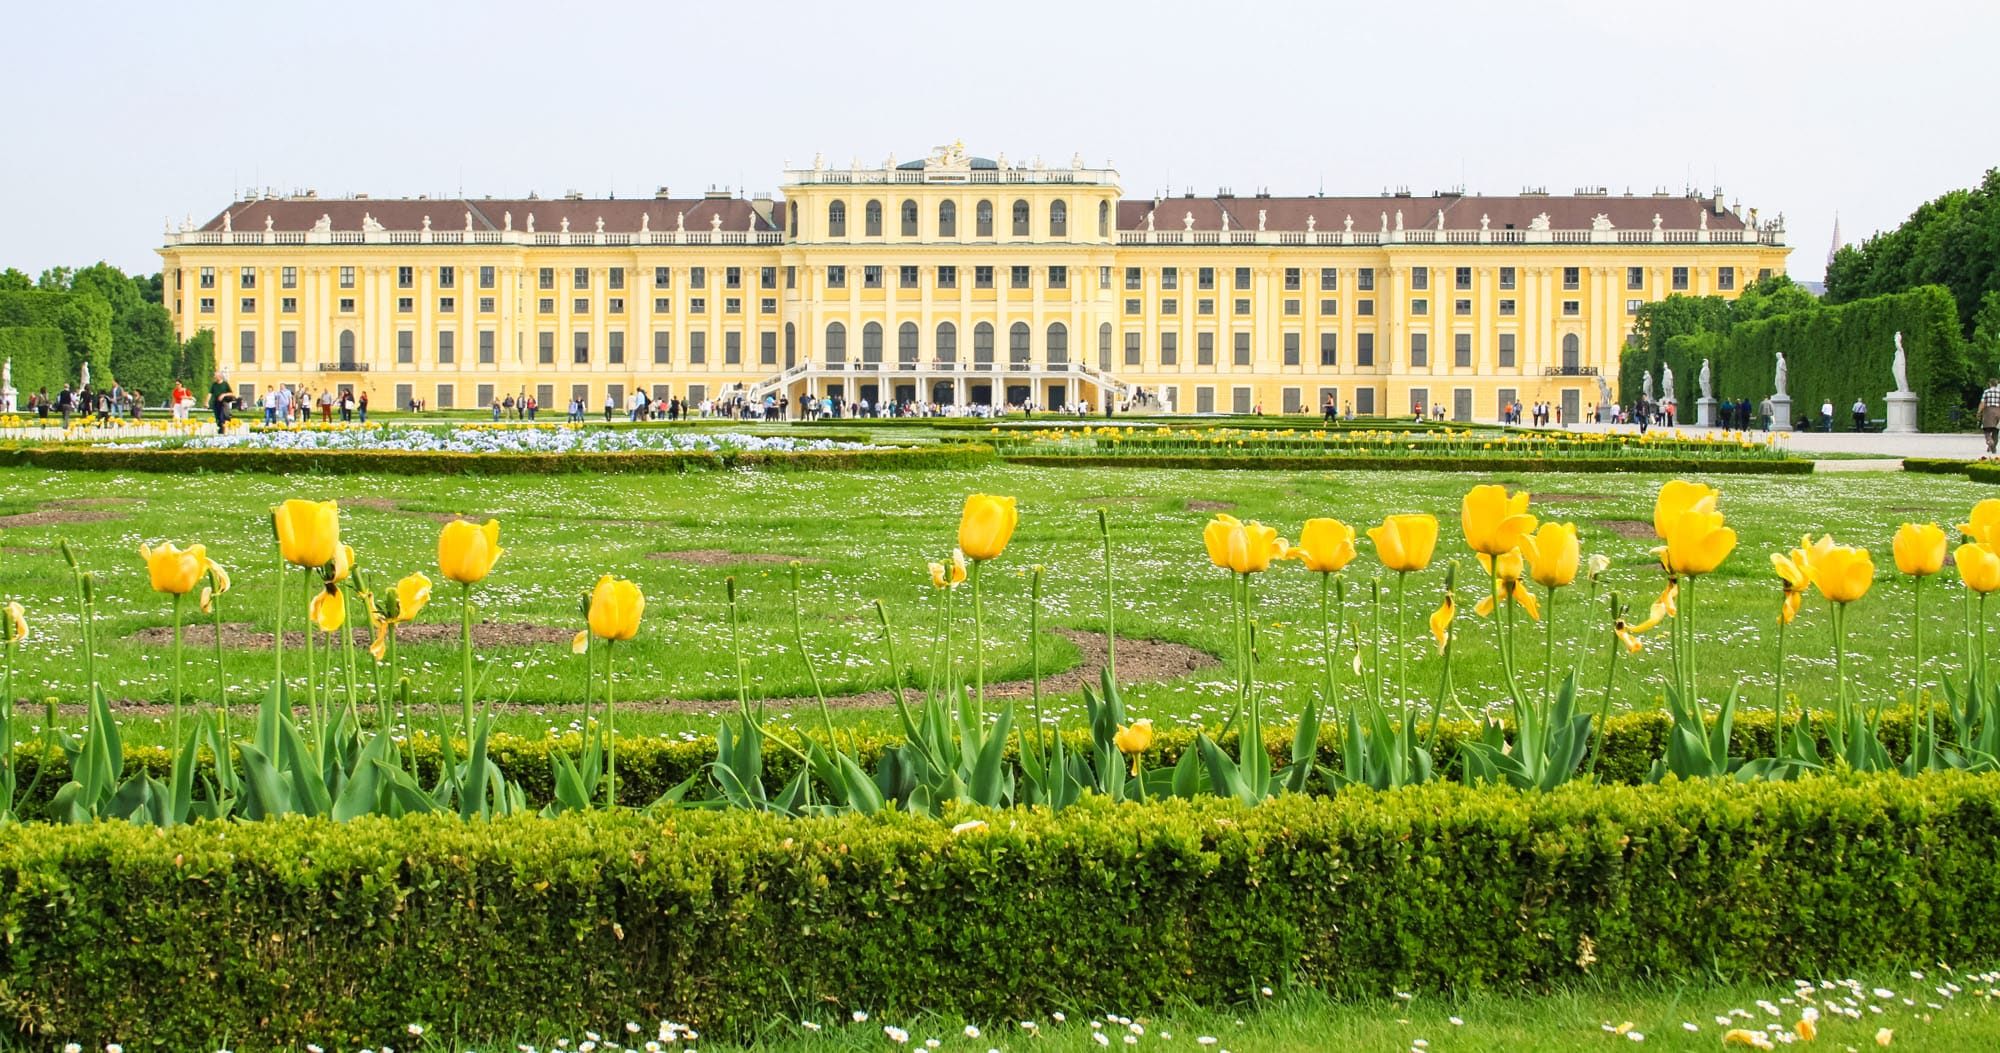 Featured image for “Vienna Bucket List: 25 Amazing Things to Do in Vienna”